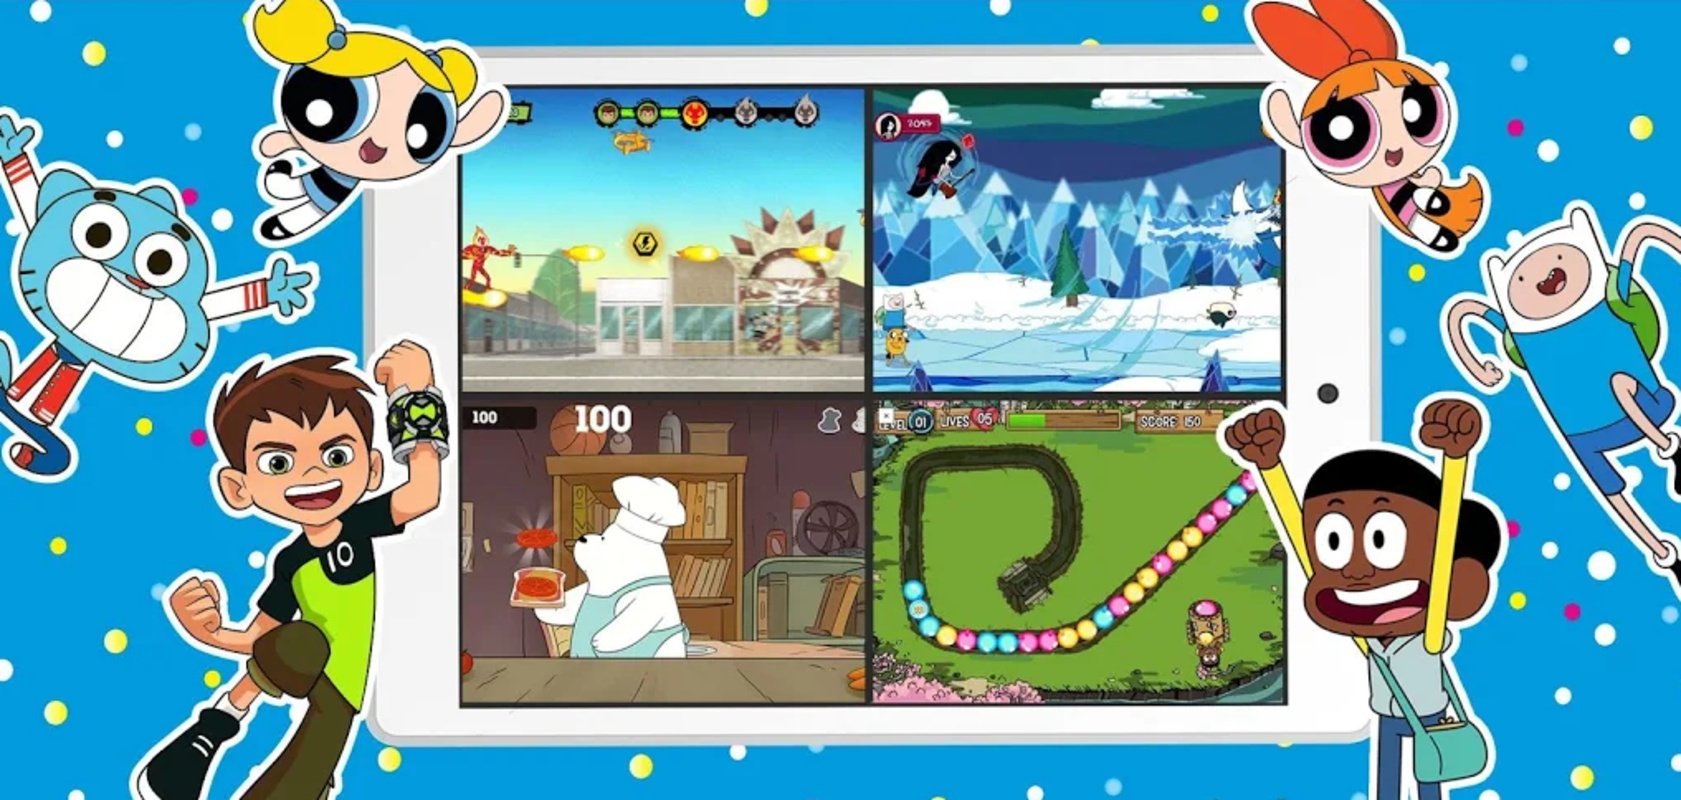 How to Download Cartoon Network GameBox for Android